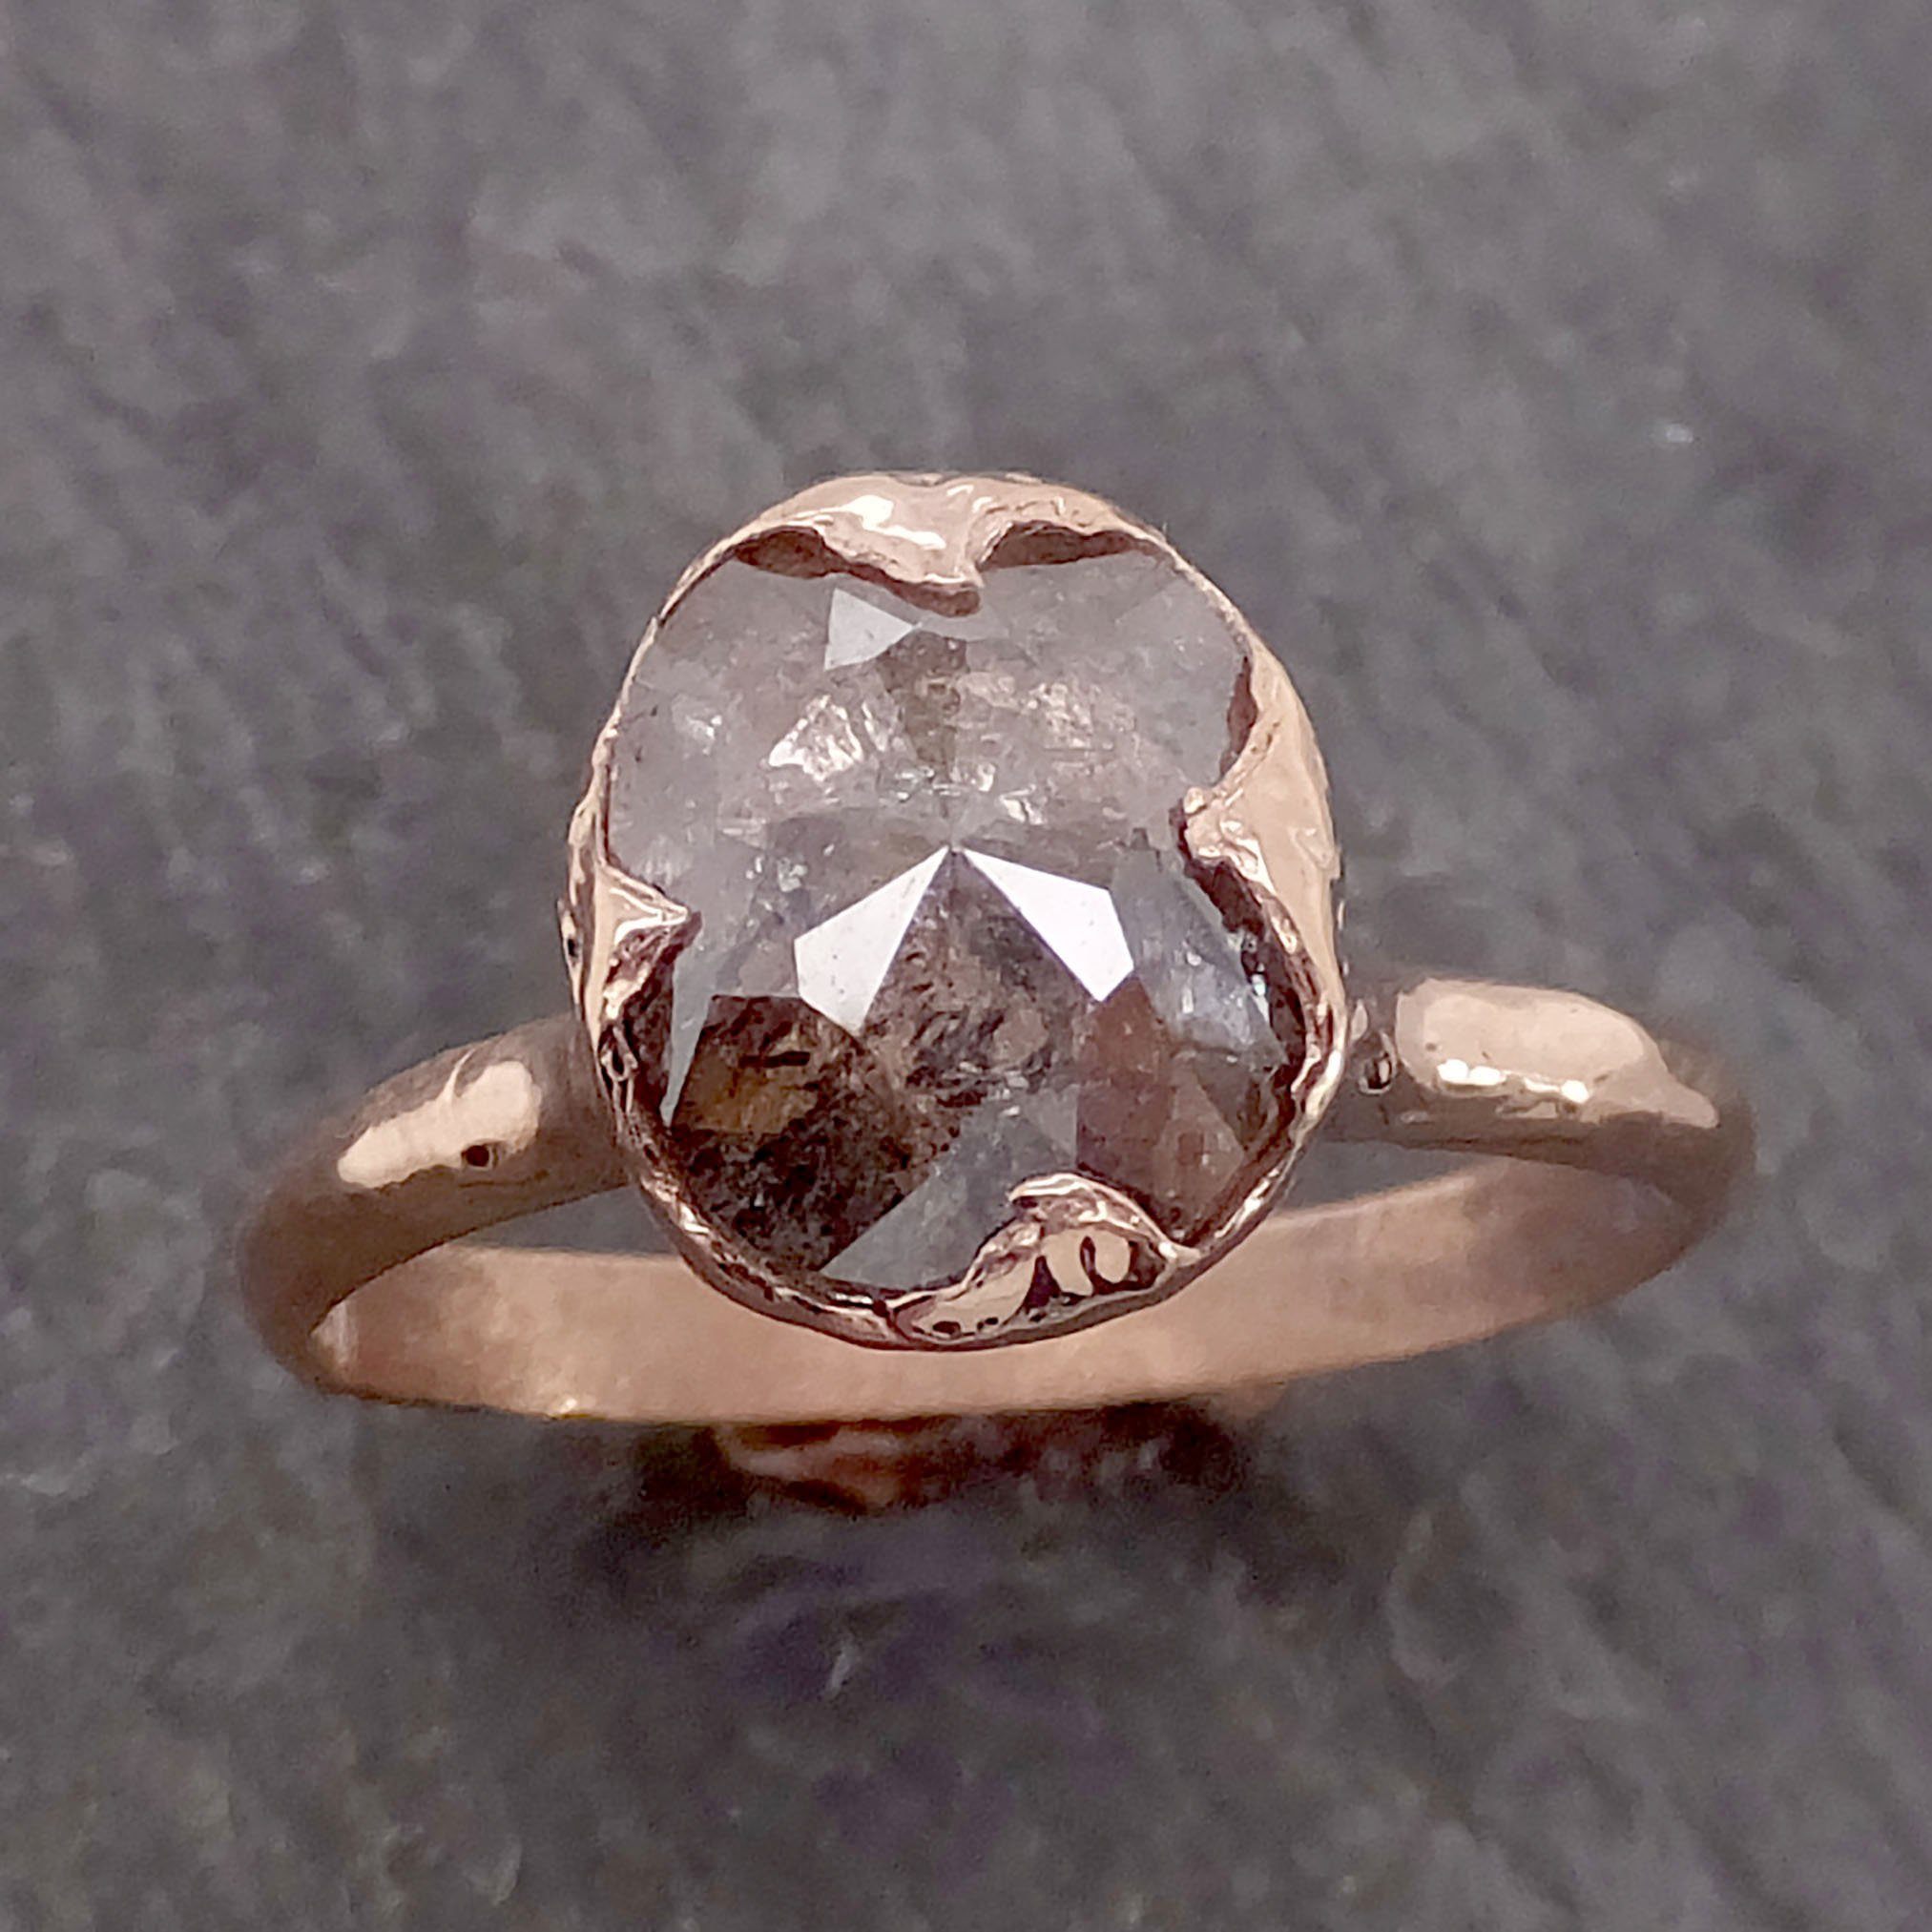 Faceted Fancy cut Salt and Pepper Diamond Solitaire Engagement 14k Rose Gold Wedding Ring byAngeline 2139